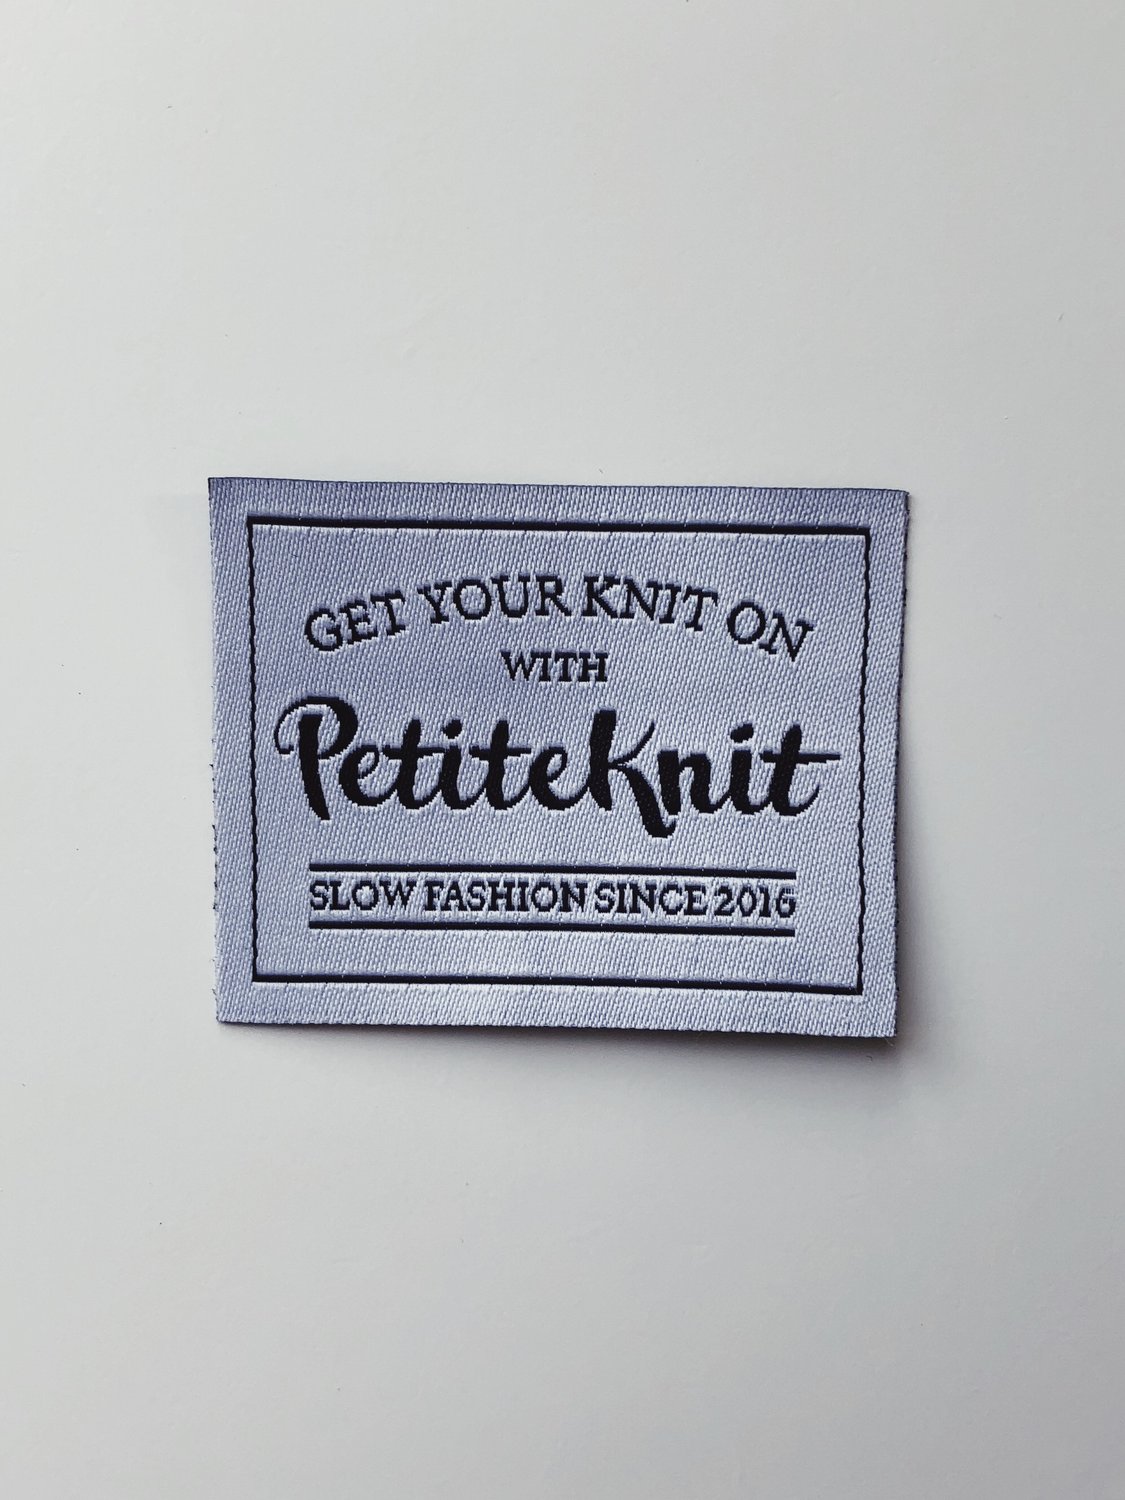 Label "Get your knit on with PetiteKnit"